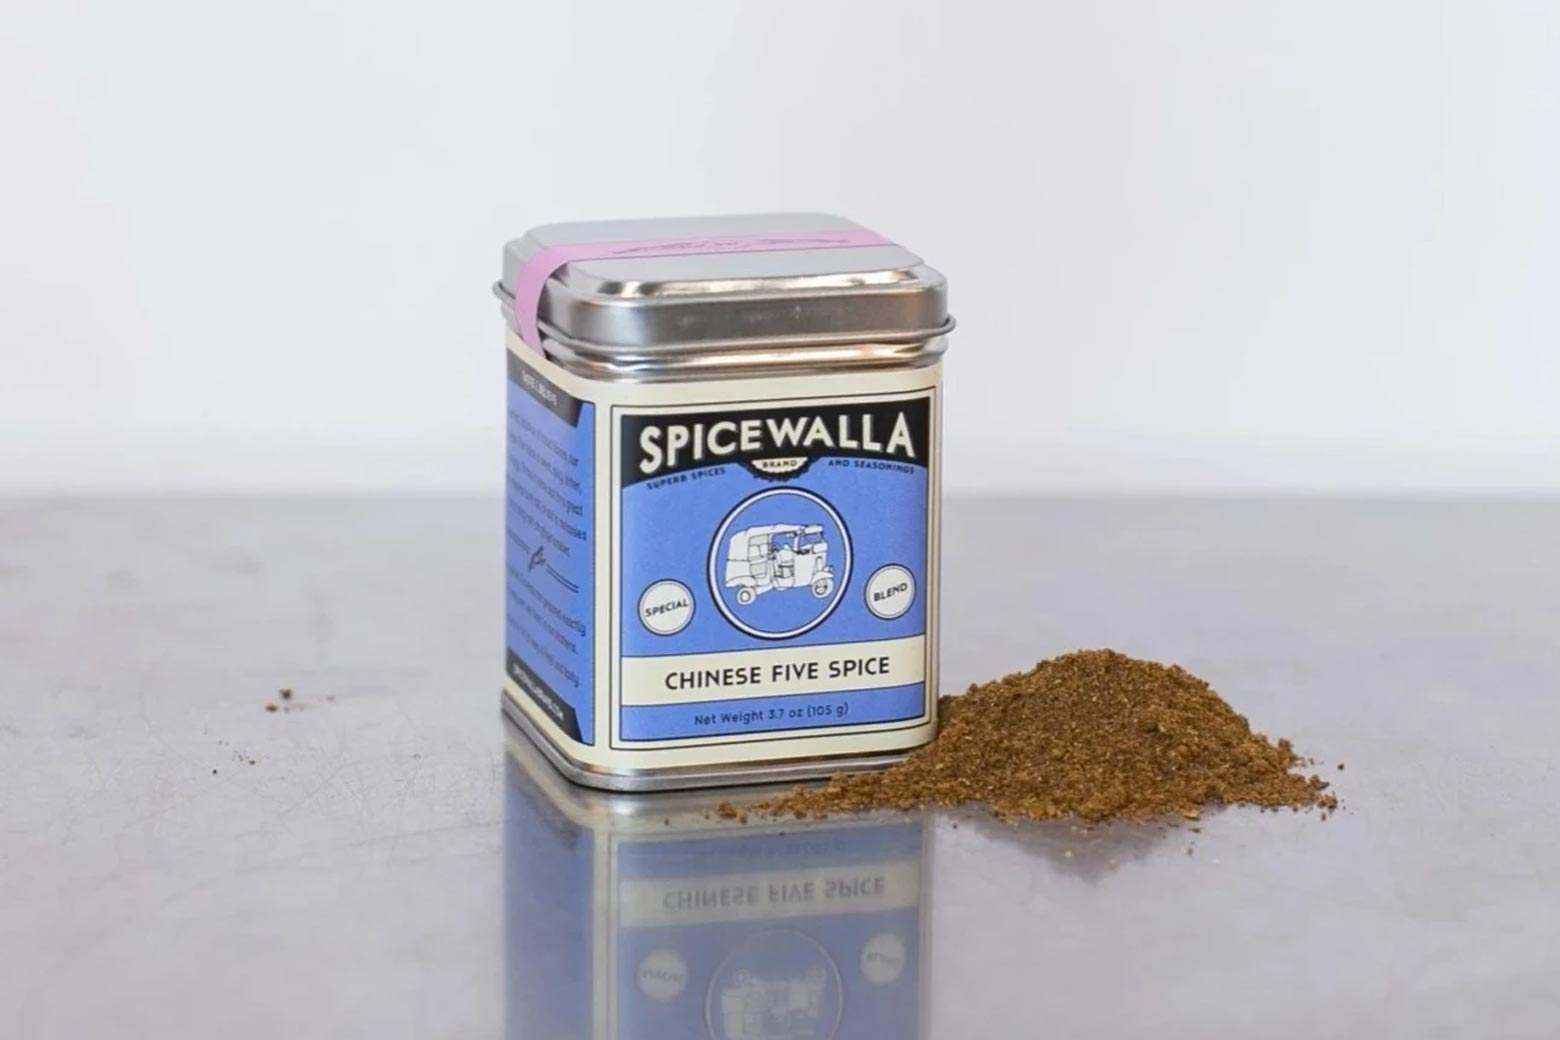 Spice can with a pile of five-spice powder beside it on a metal surface